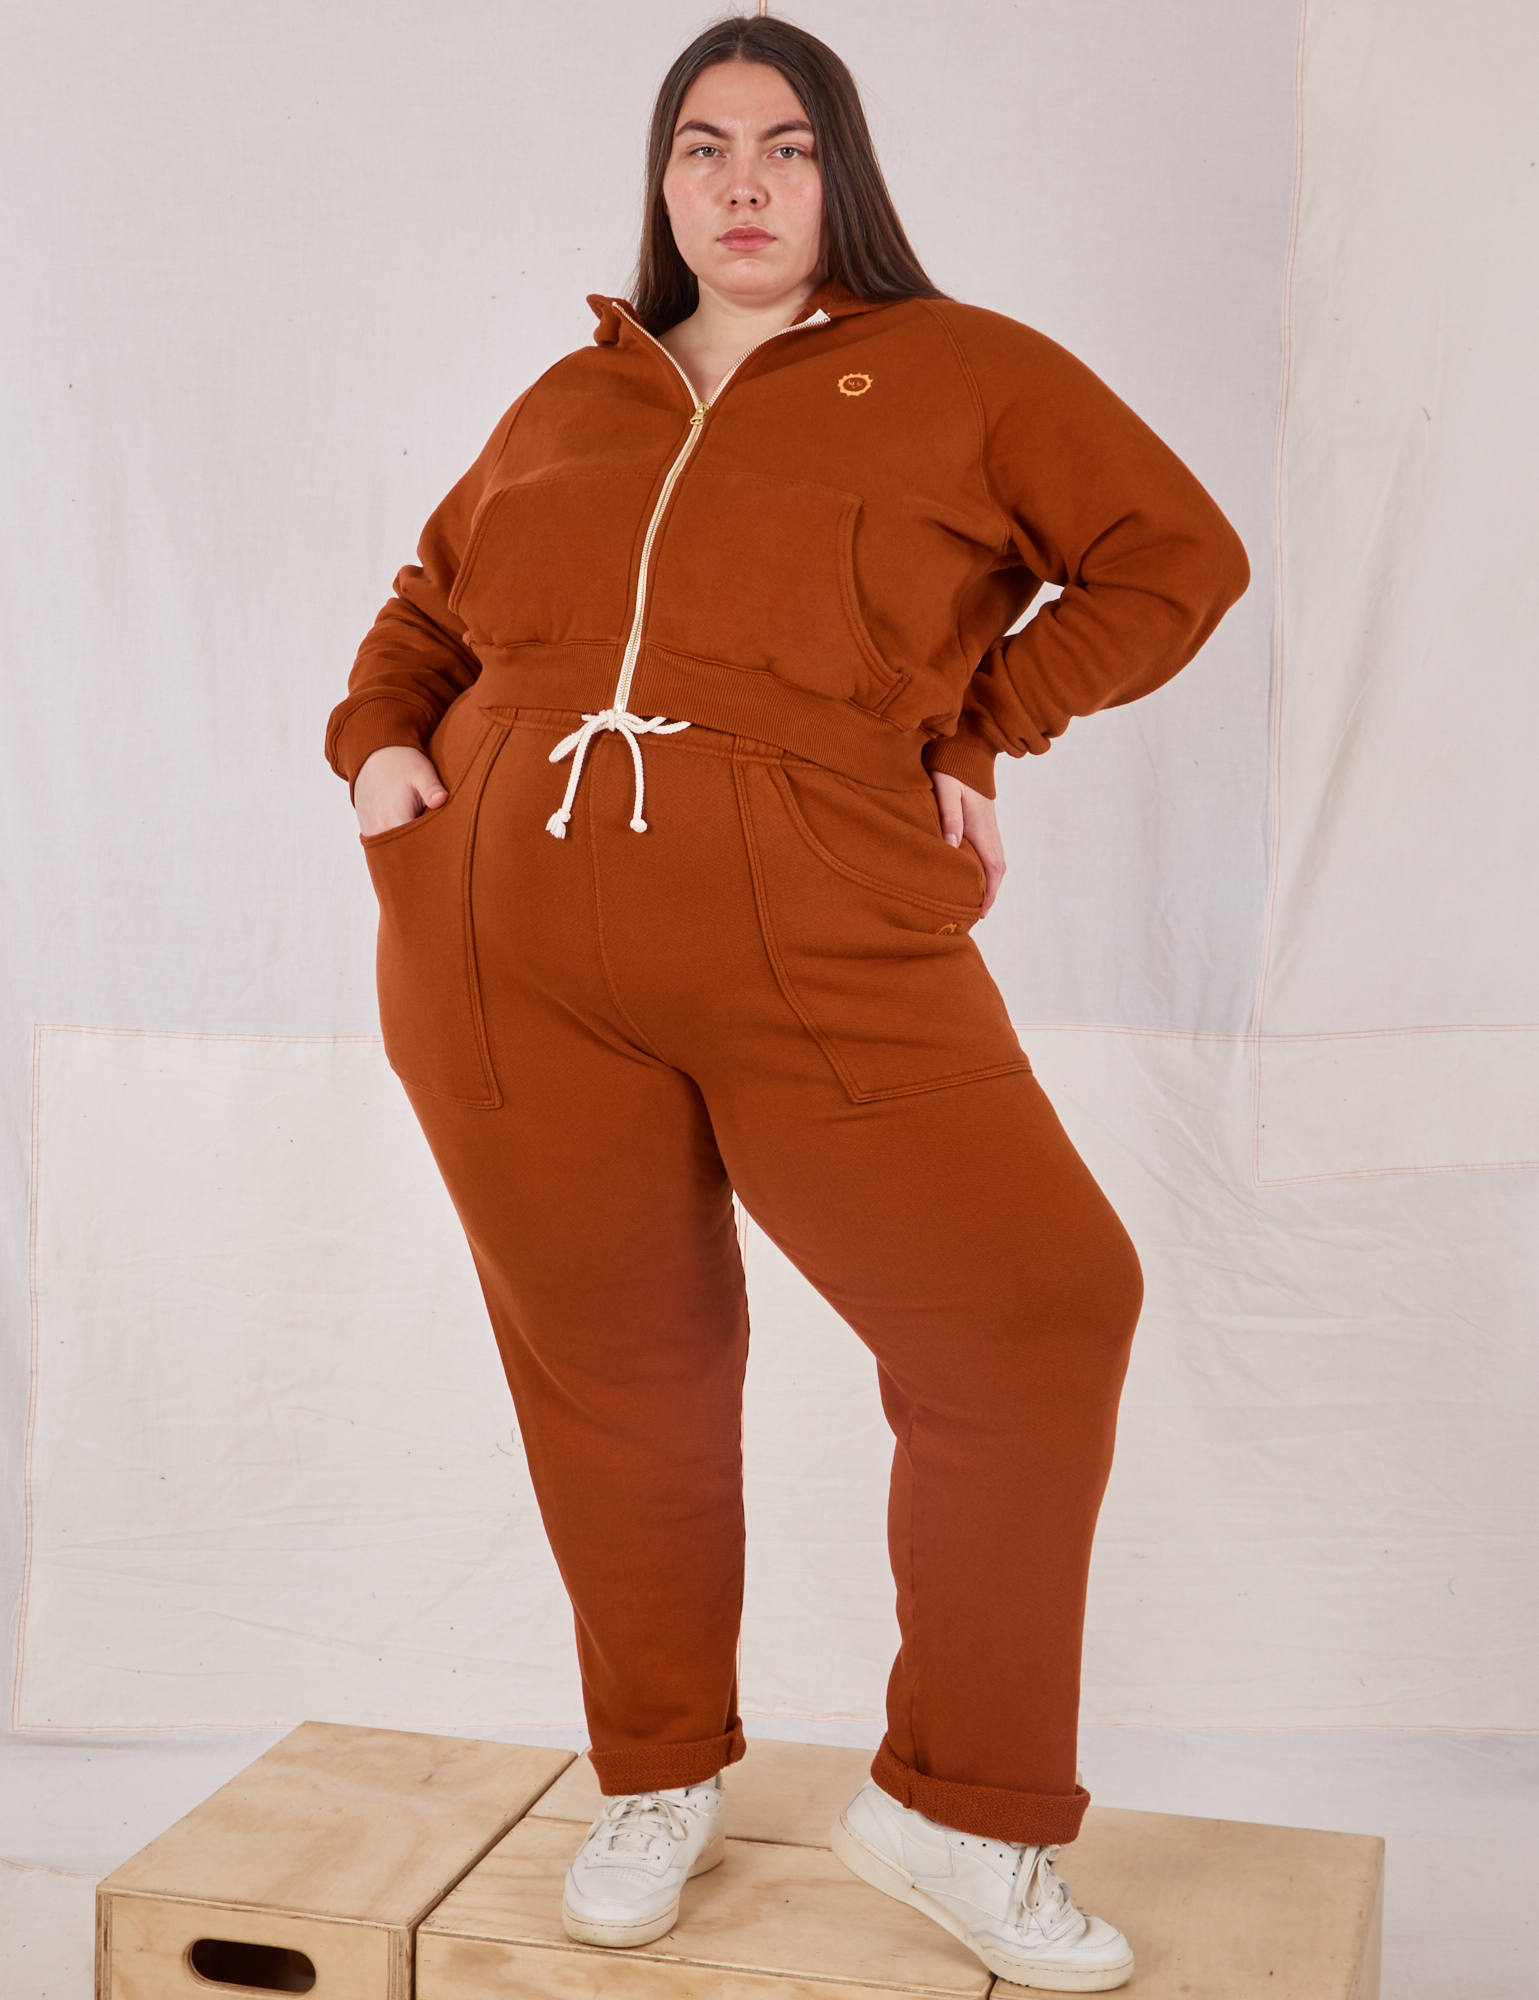 Marielena is wearing Rolled Cuff Sweat Pants in Burnt Terracotta and matching Rolled Cuff Sweat Pants